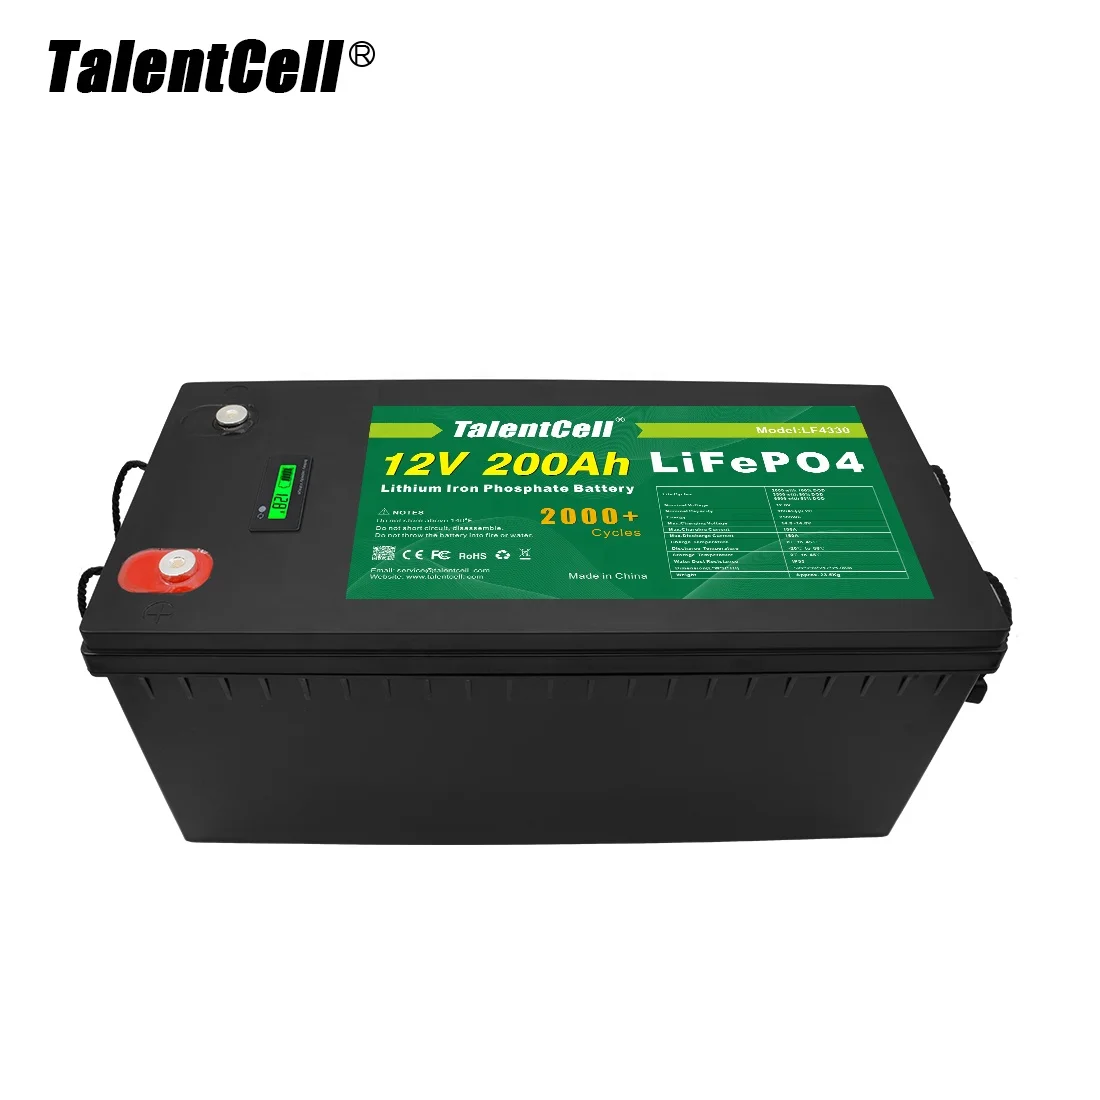 Talentcell Dropshipping Agent Lifepo4 12V 200Ah Battery Dropshipping Products 2021